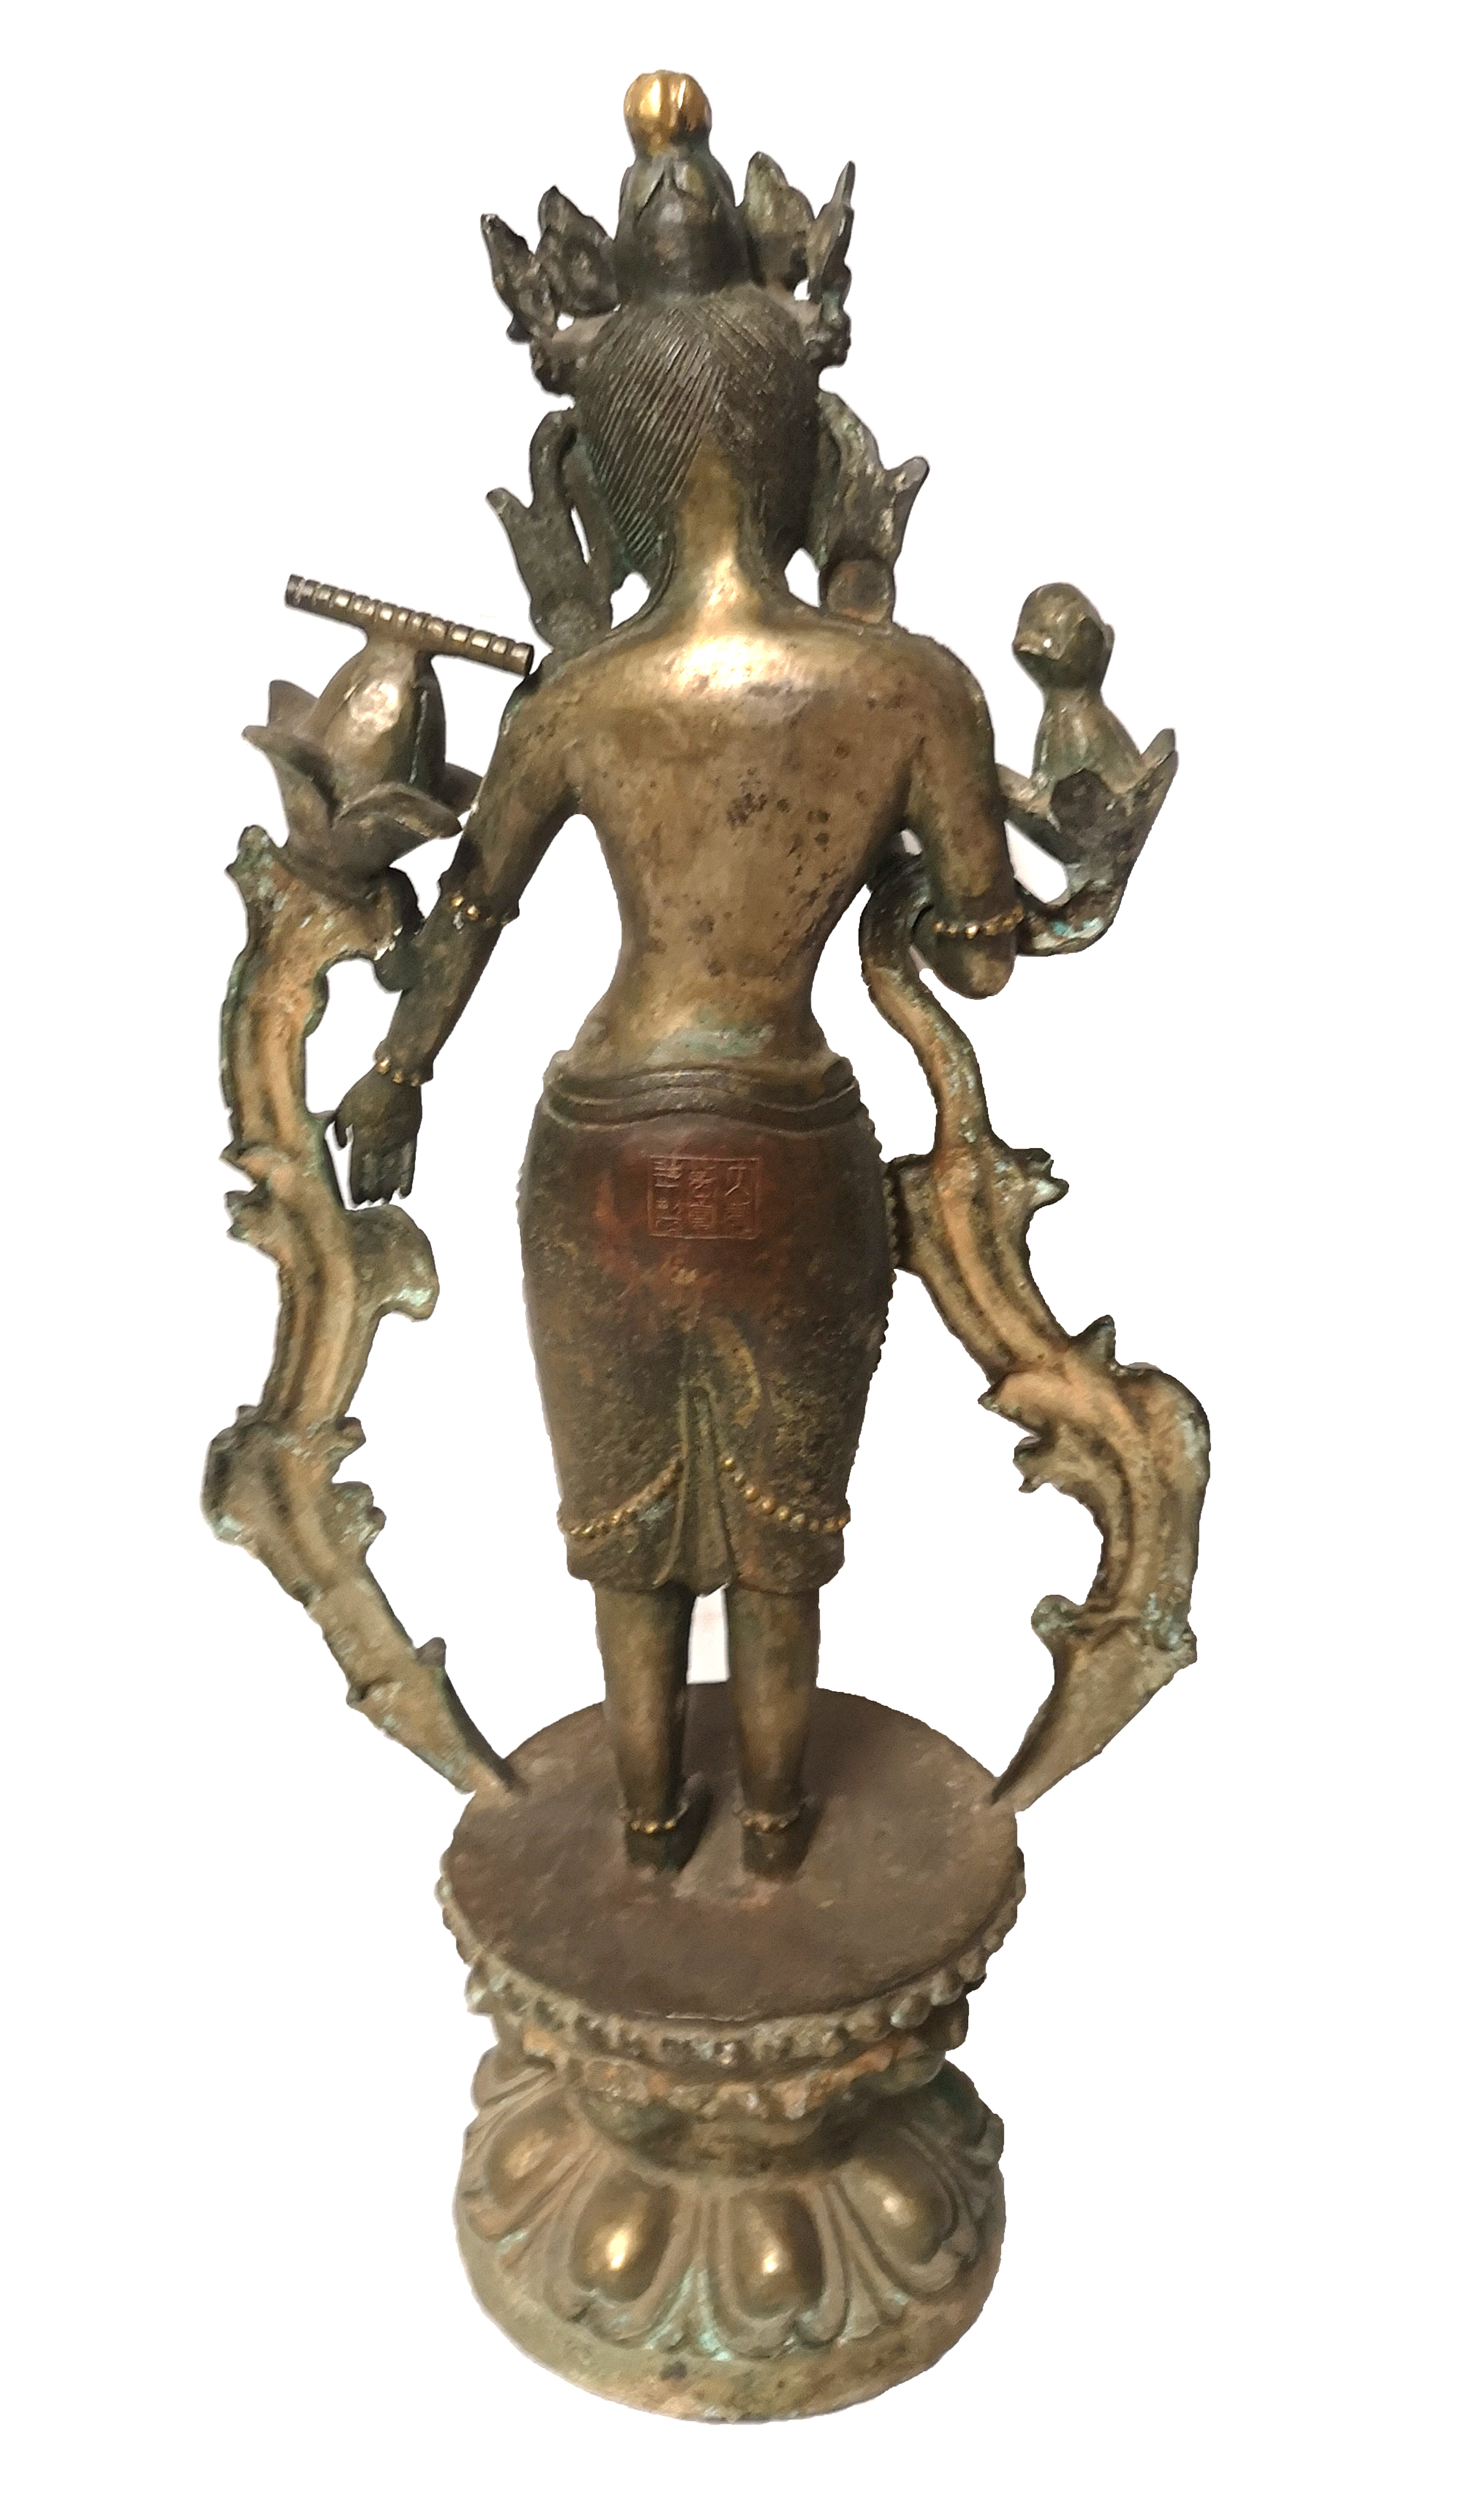 A LARGE TIBETAN BRONZE FIGURE OF A DEITY Standing on a lotus flower base, the collar set with - Image 3 of 4